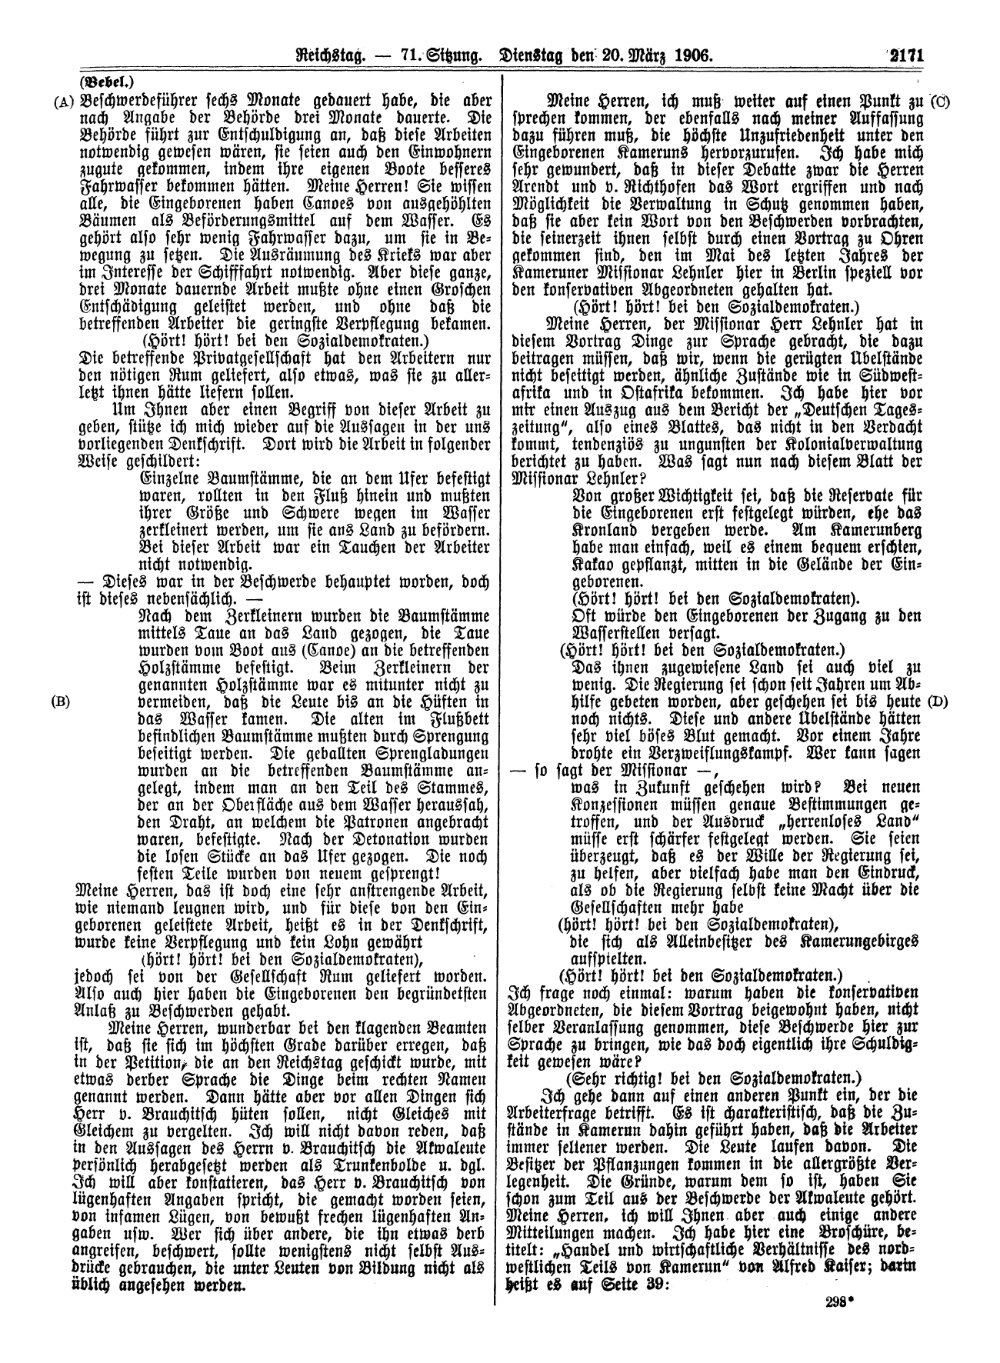 Scan of page 2171